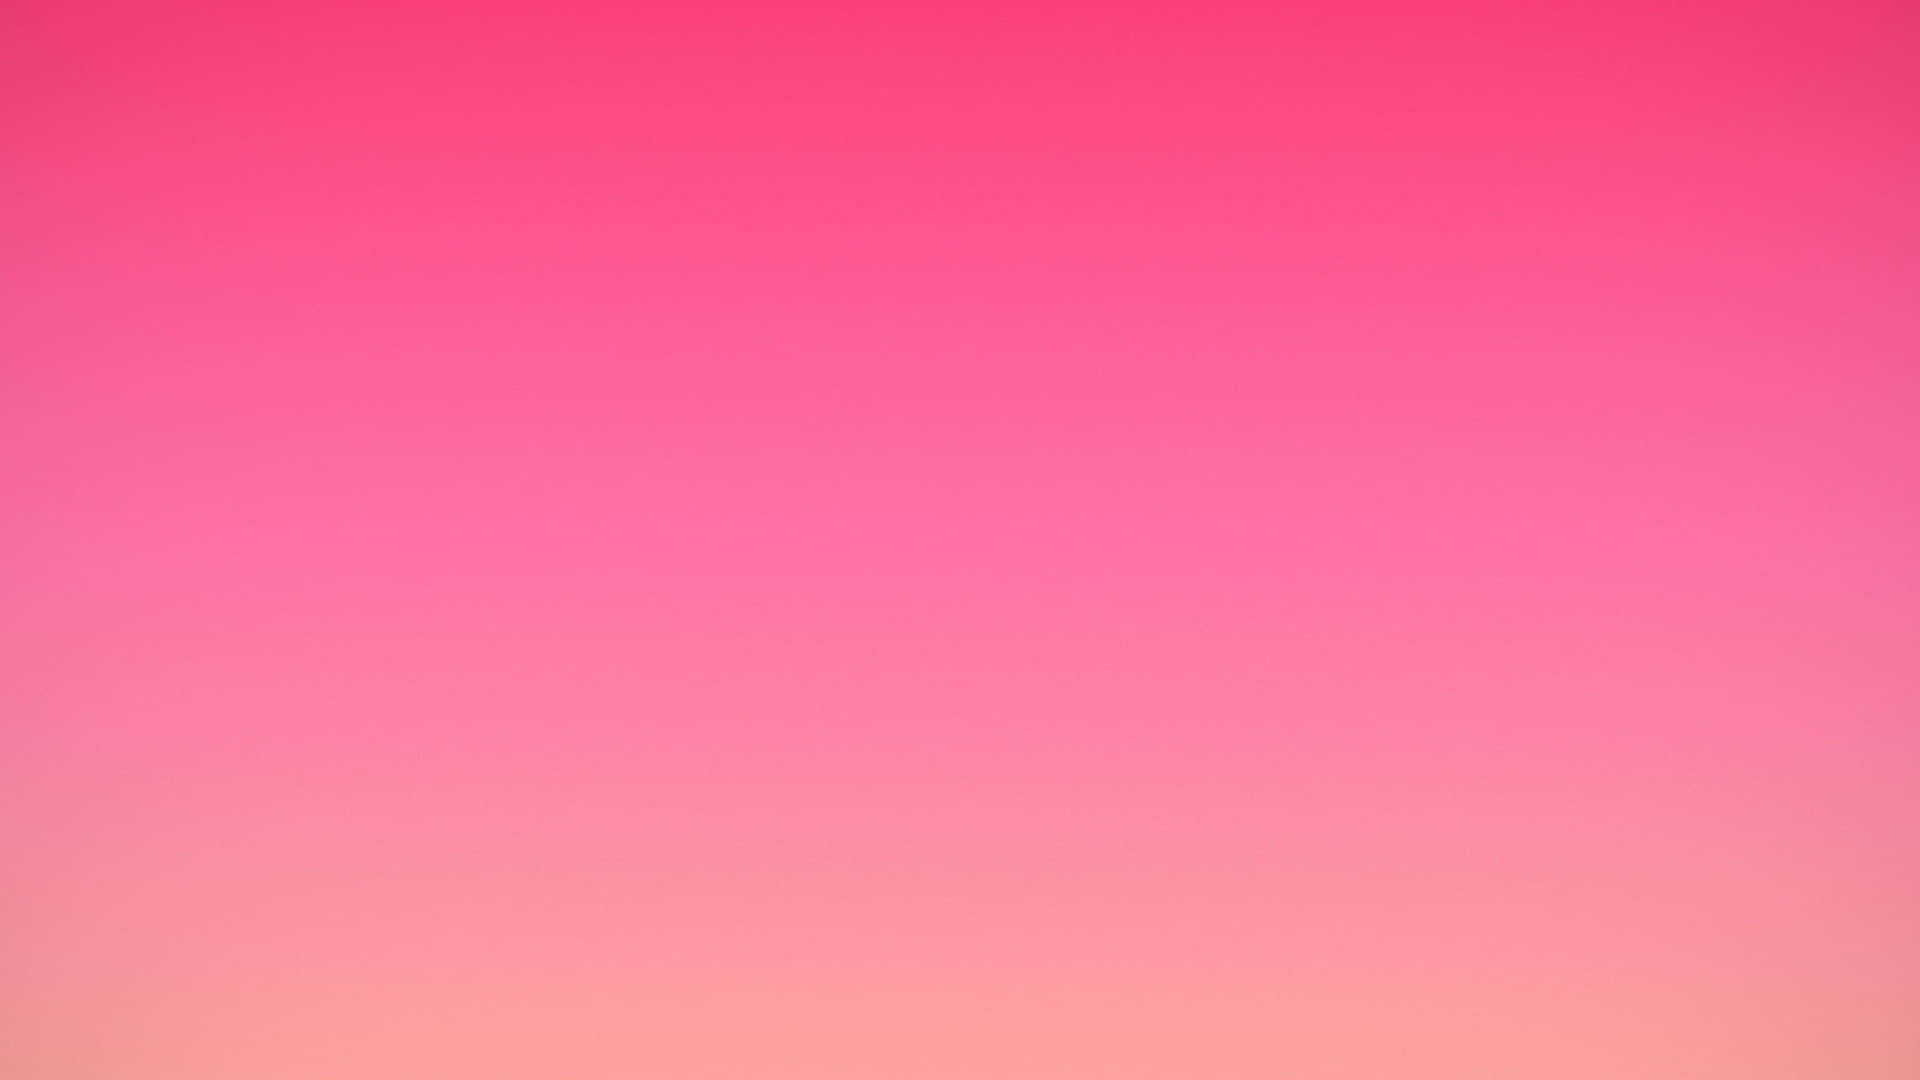 A Pink And Orange Gradient Wallpaper